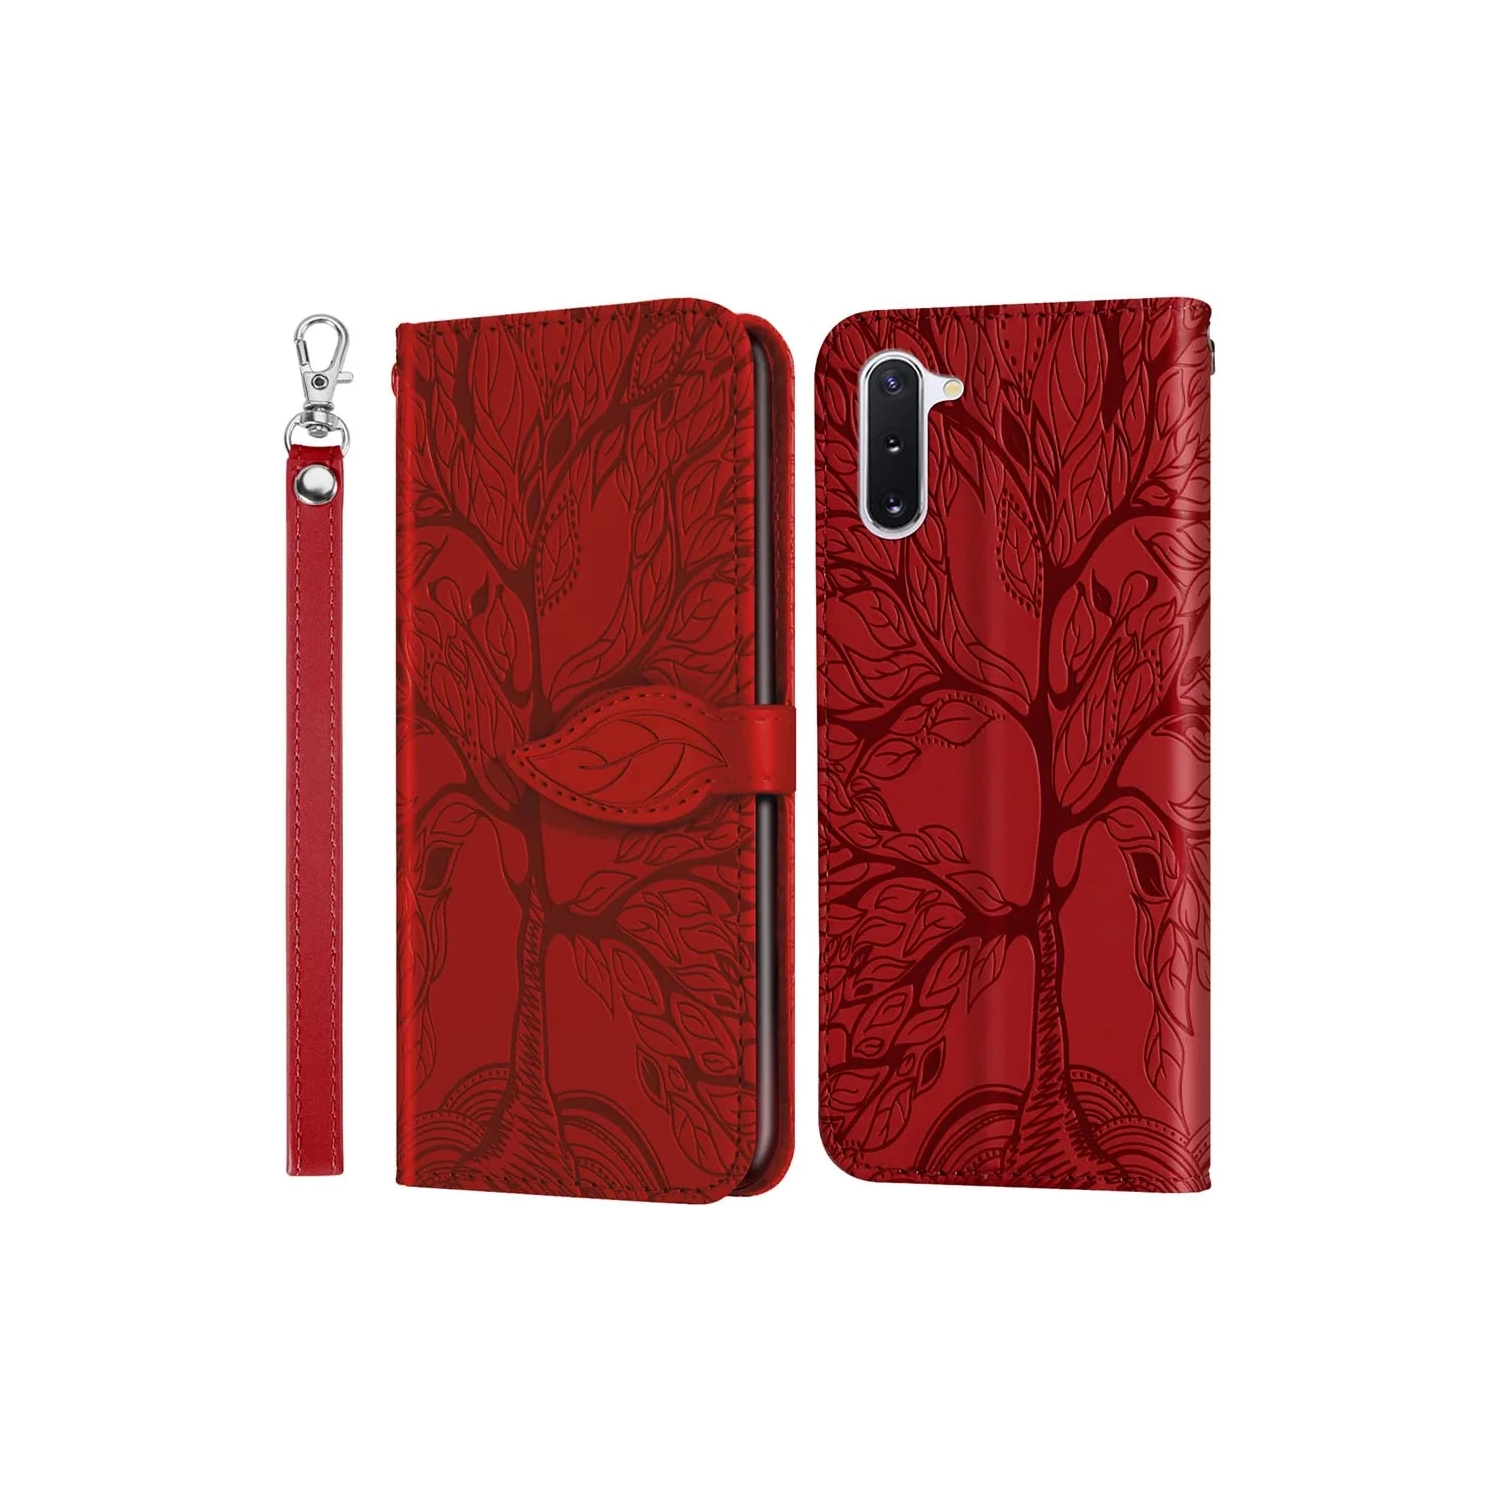 Premium PU Leather Embossed Tree Wallet Case with card slots and wrist strap for Samsung Galaxy Note 10 SM-N970